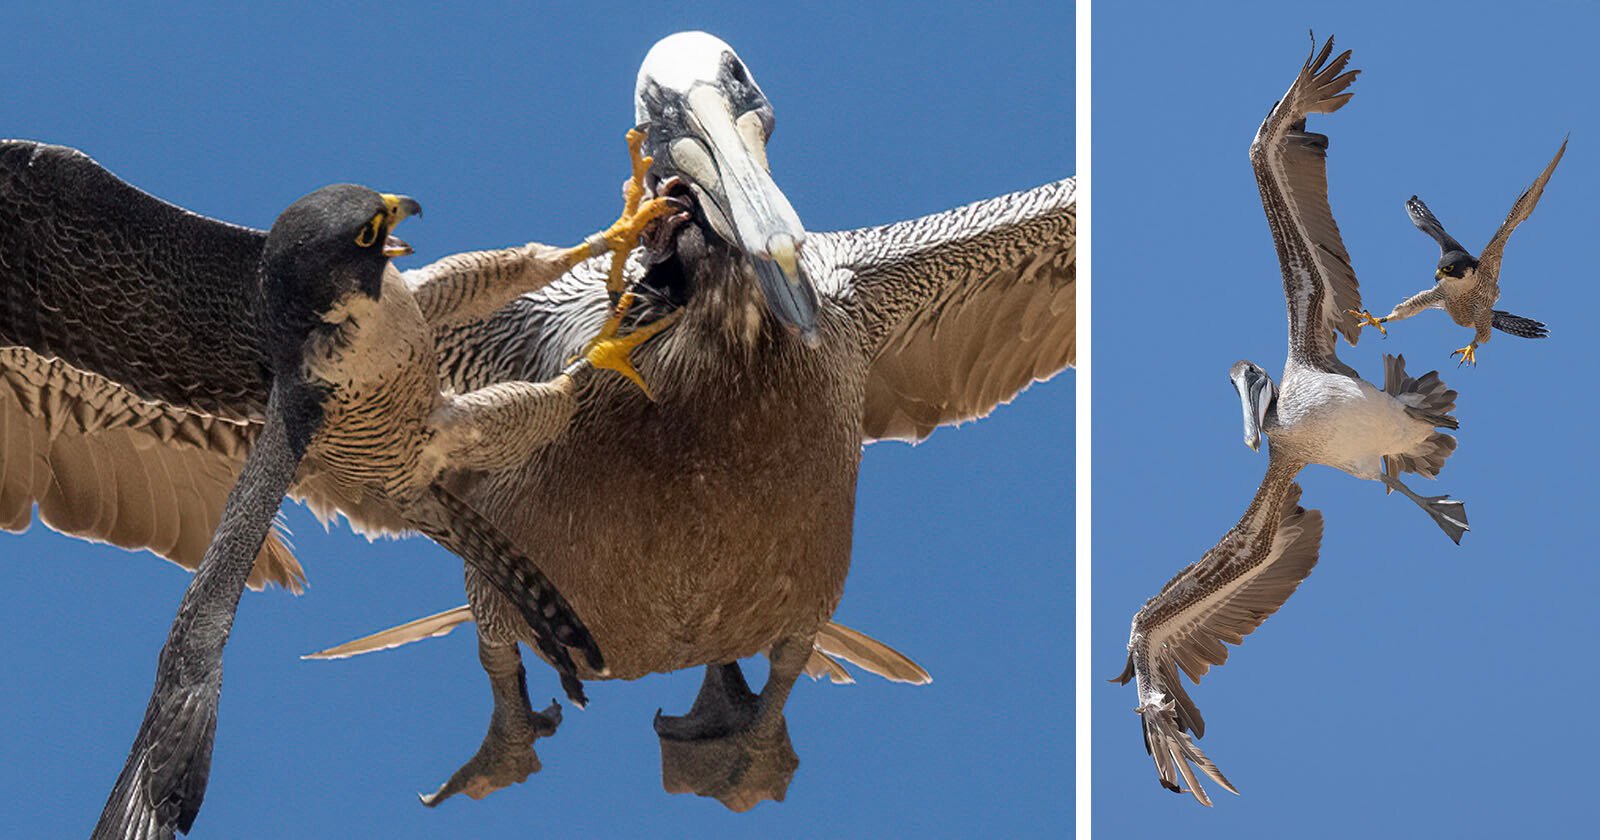  falcon attacks much larger pelican series spectacular photos 